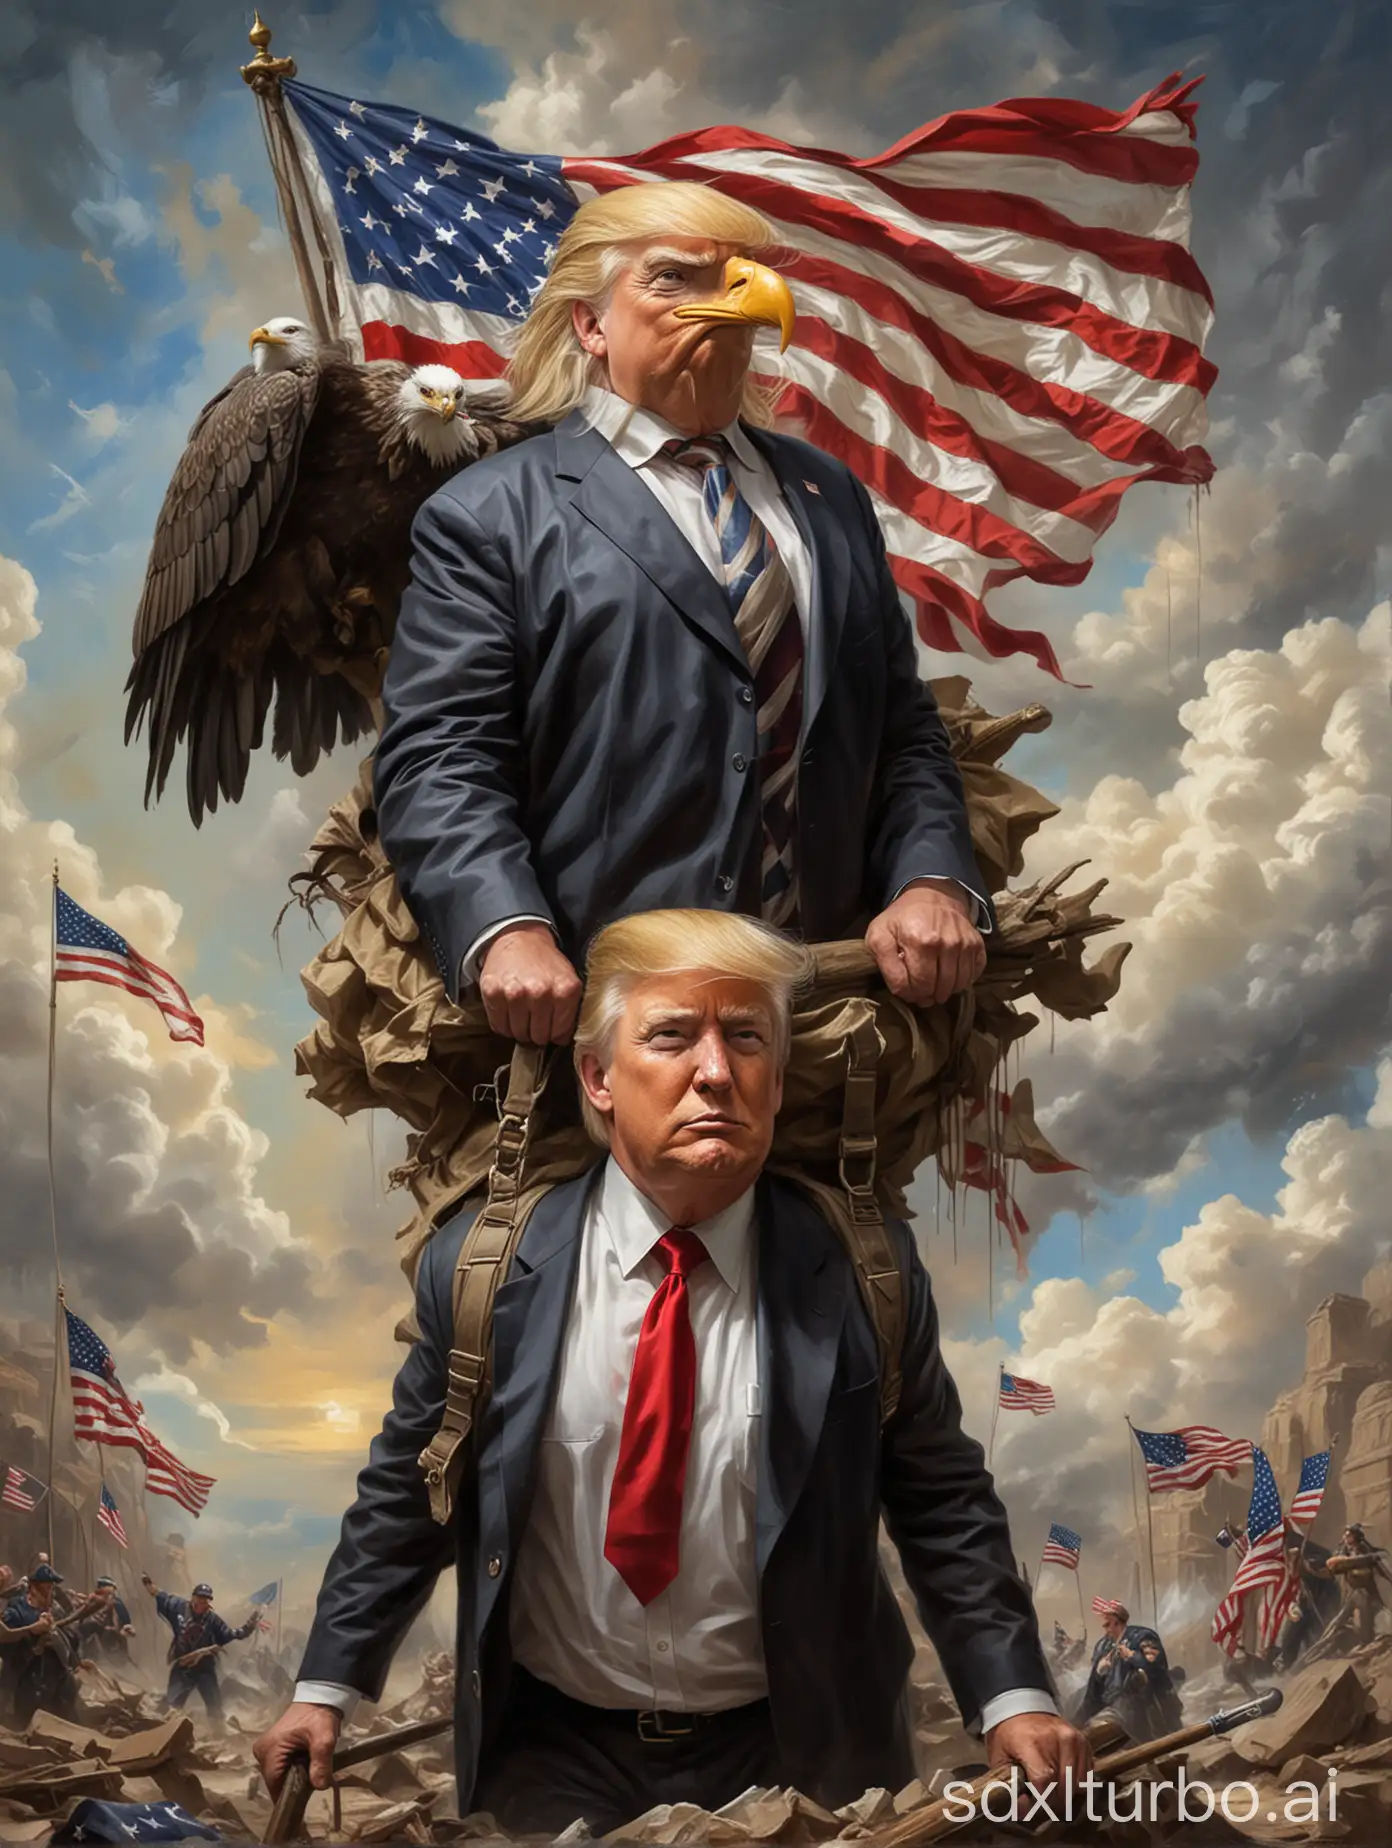 Create an oil painting of Donald J. Trump carrying the world on his shoulders like Atlas. Include American patriotic elements such as the flag and an eagle in the background. The style should be heroic and grandiose.